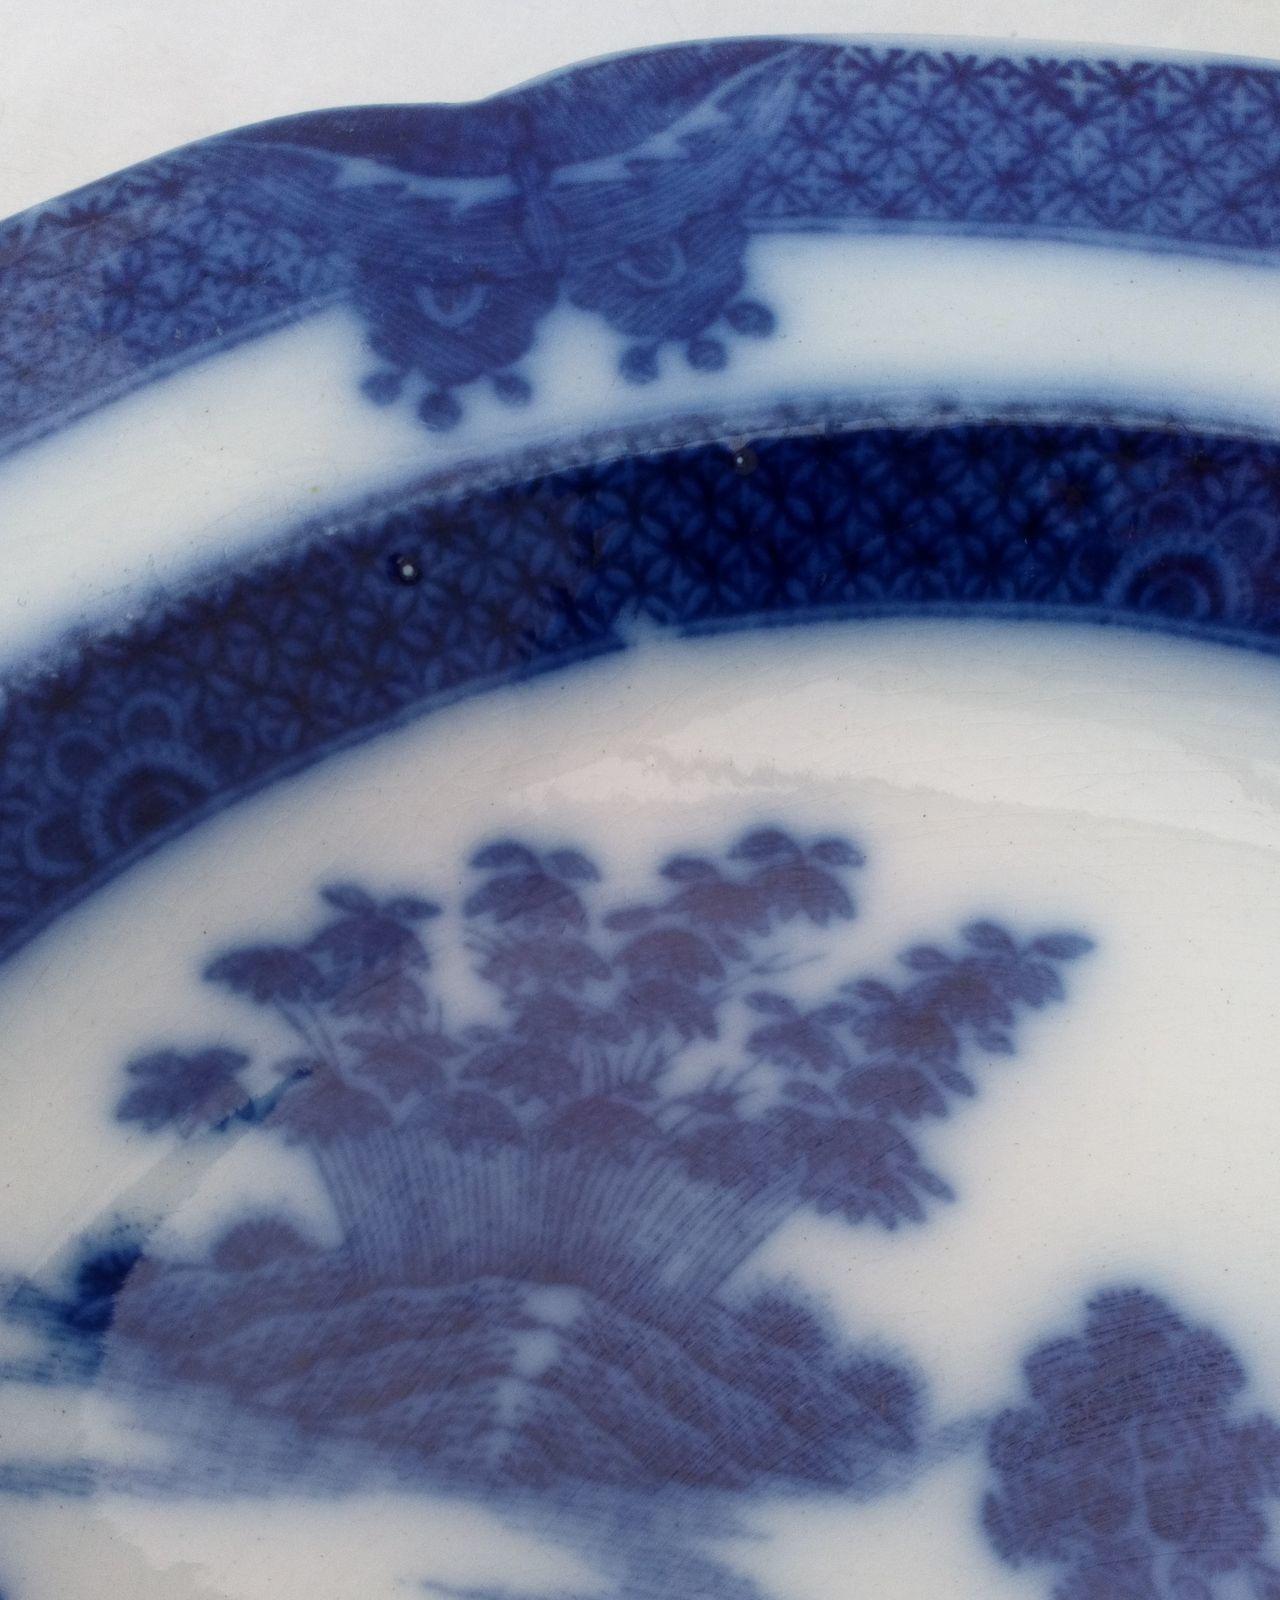 Antique Georgian blue and white Chinoiserie transferware Staffordshire pearlware plate boy on a buffalo pattern circa 1800